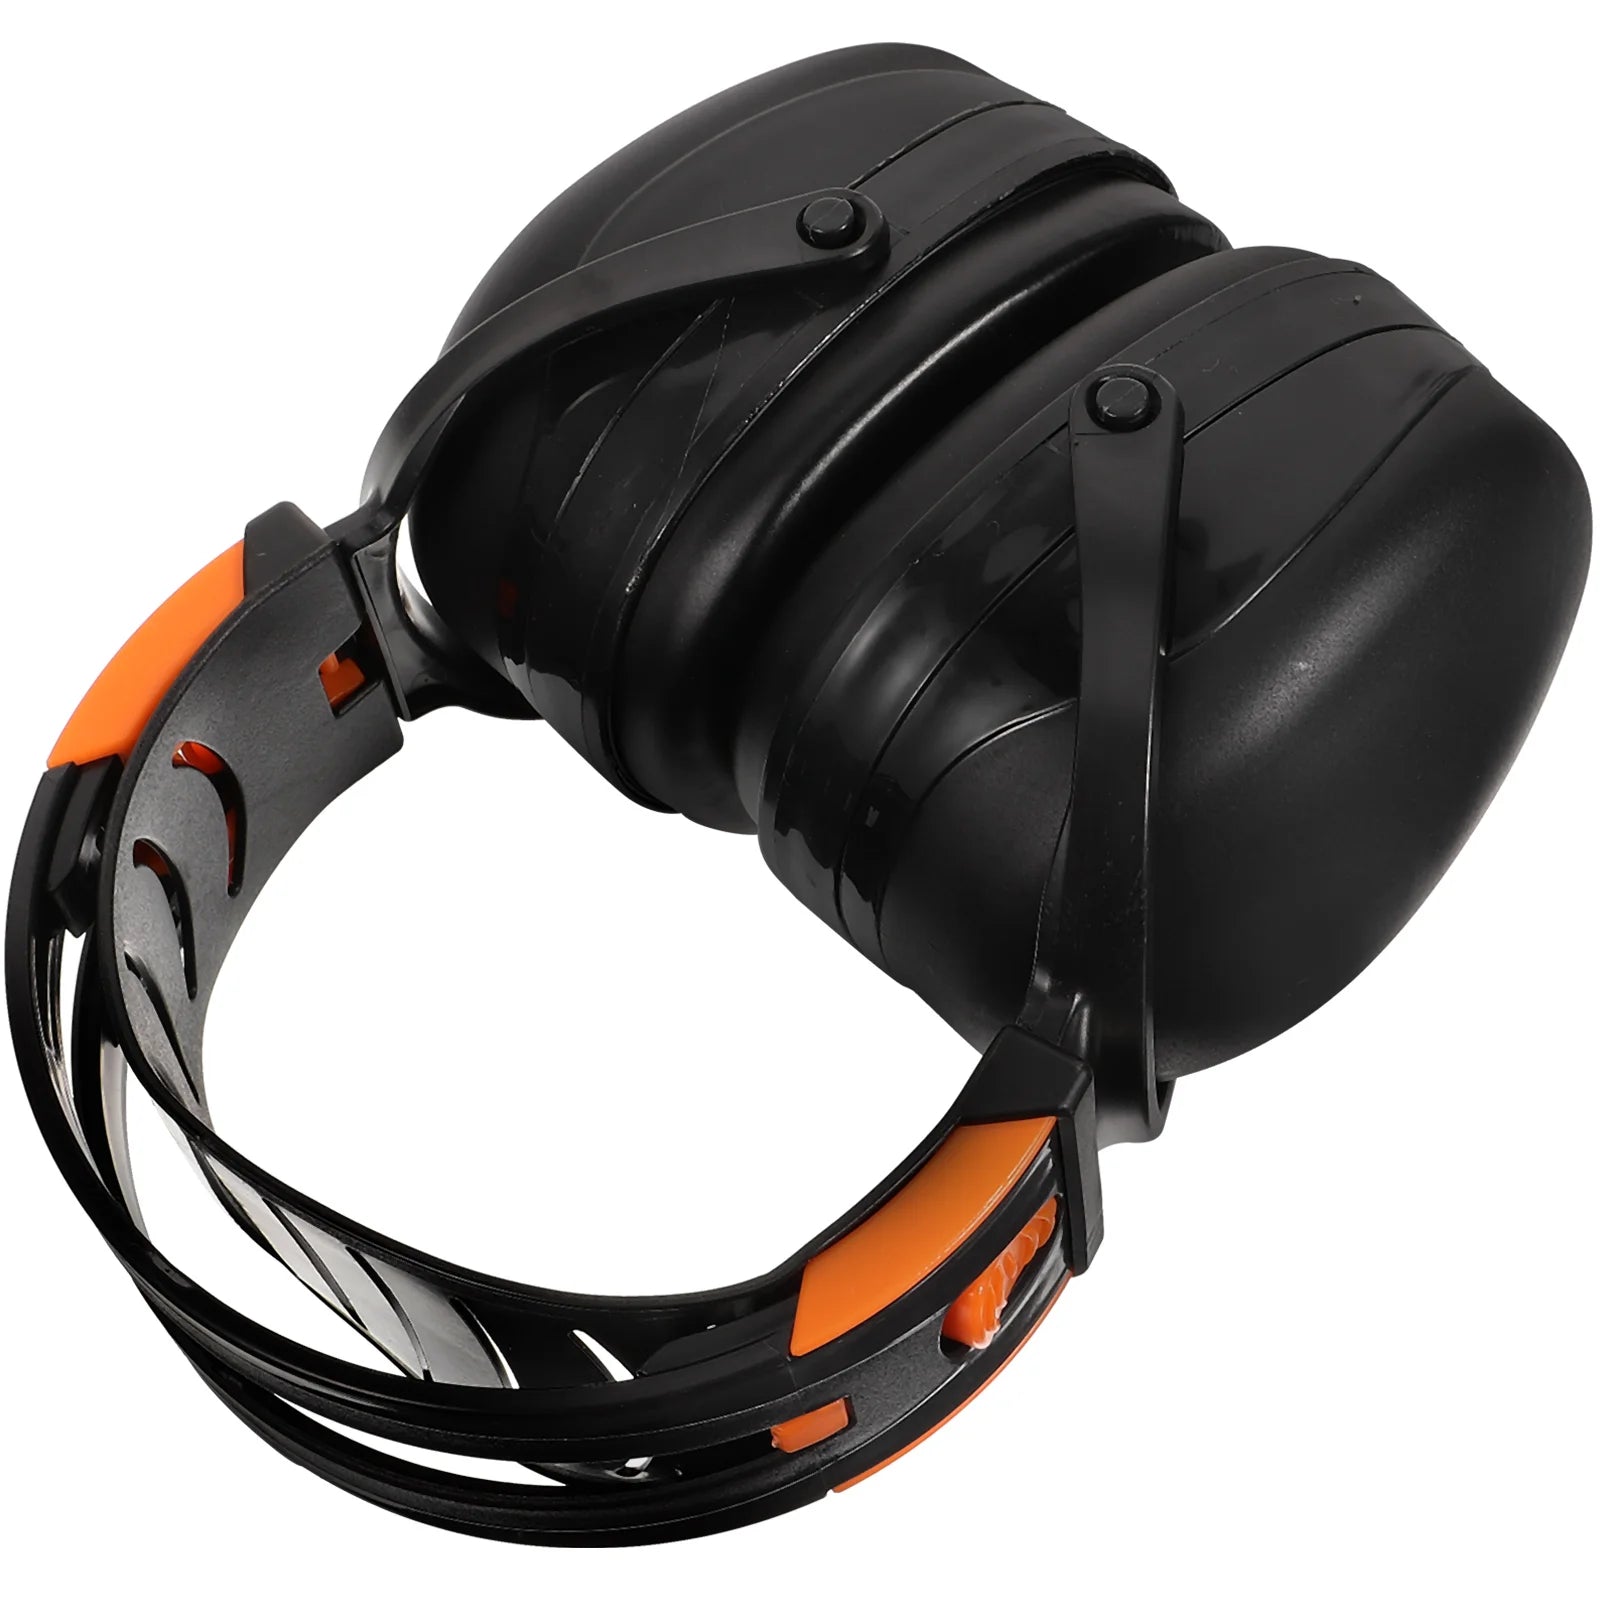 Soundproof Earmuffs Shooting Protection Blocking Plugs Noise Cancelling Headset The Headphones